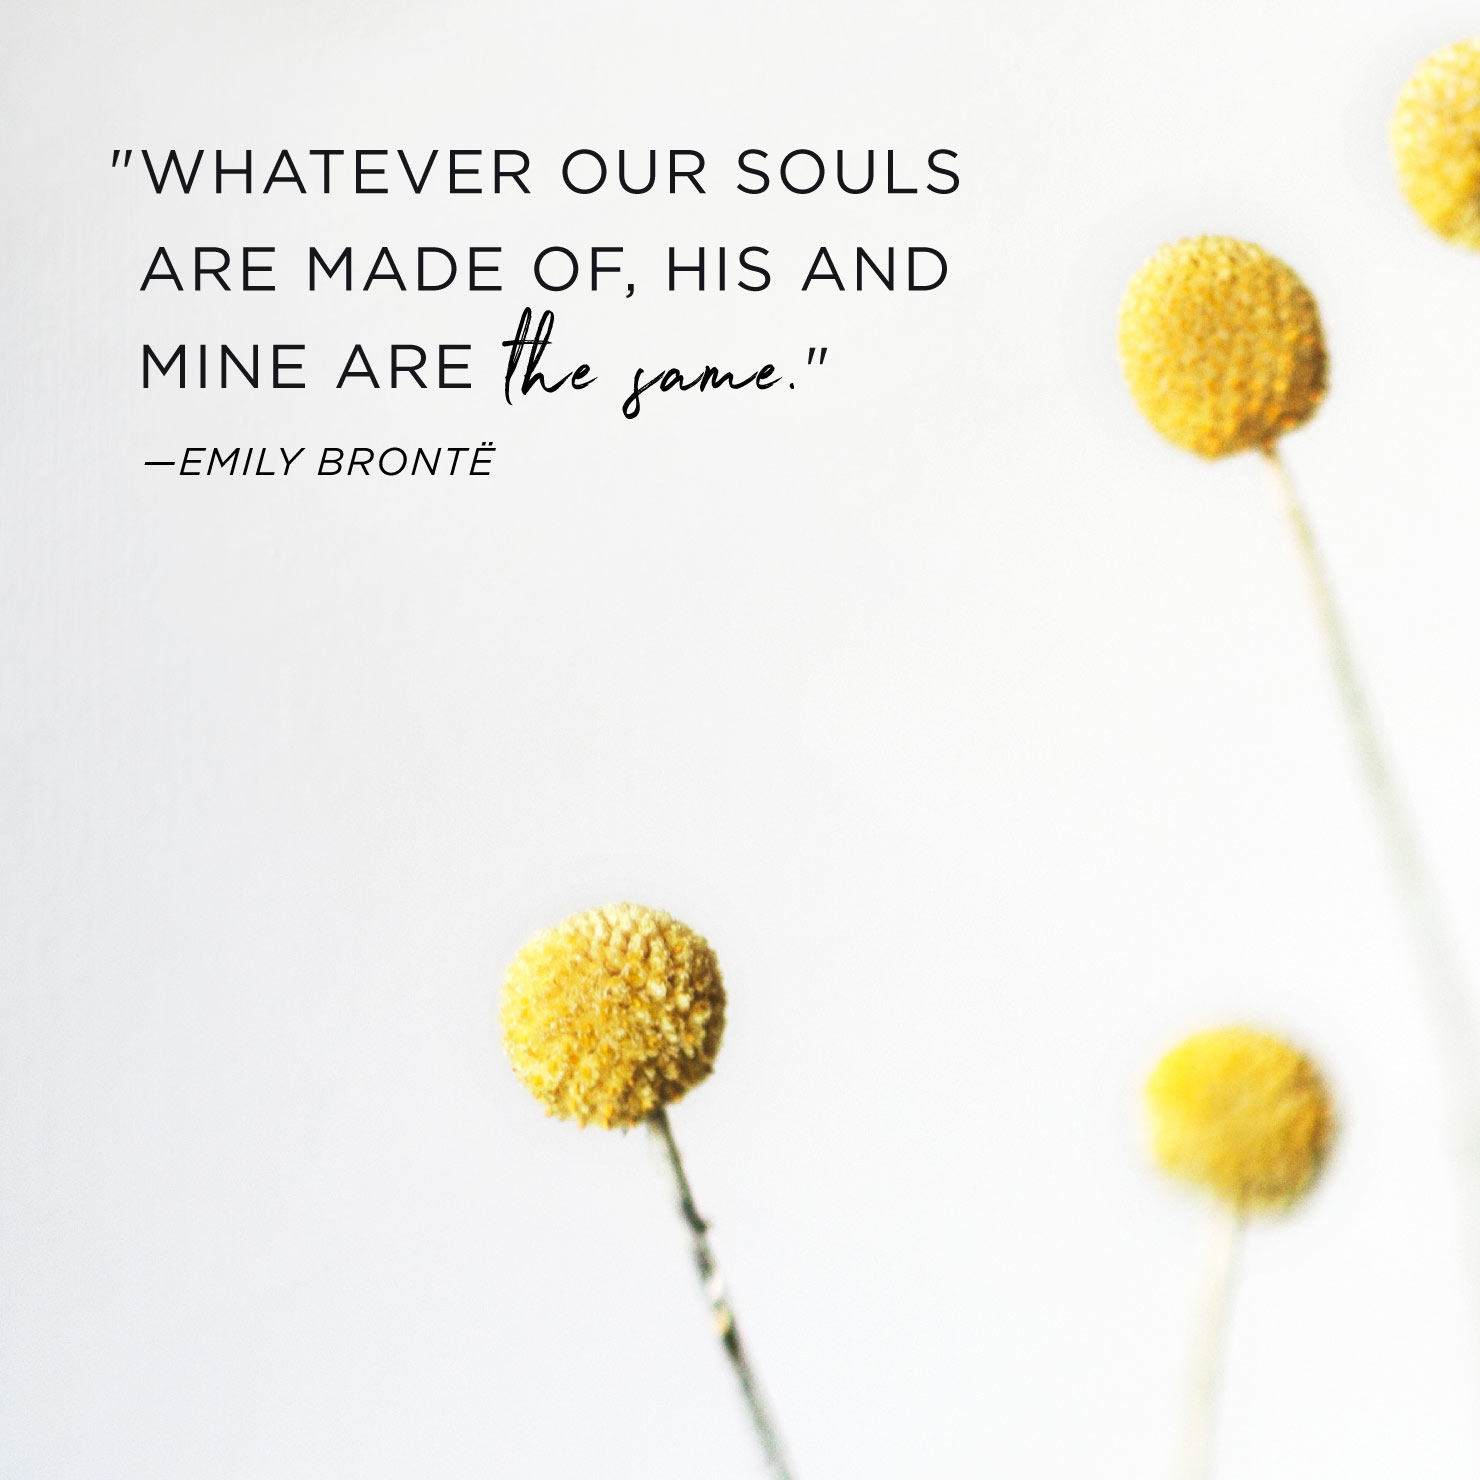 Quote above background image: Whatever our souls are made of, his and mine are the same. - Emily Bronte